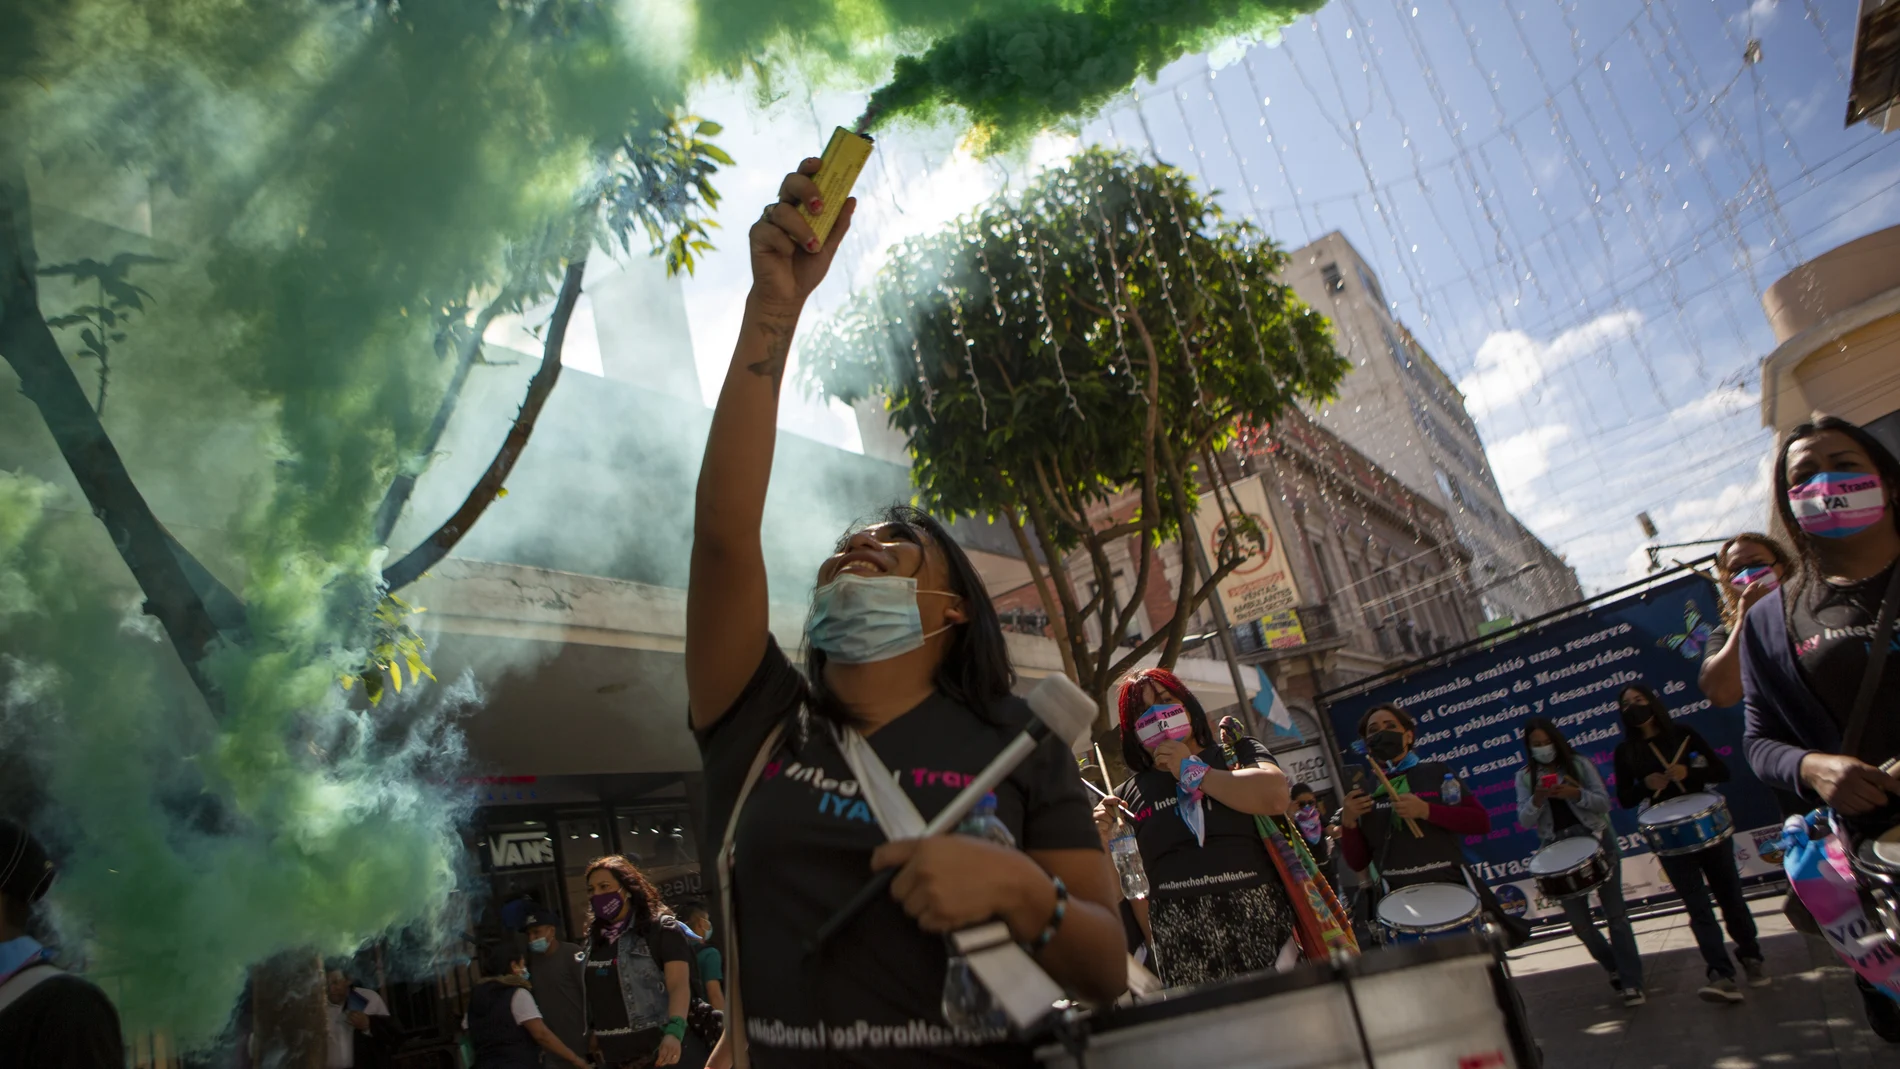 A woman waves a flare during a march marking the International Day for the Elimination of Violence Against Women, in Guatemala City, Thursday, Nov. 25, 2021. (AP Photo/Oliver de Ros)